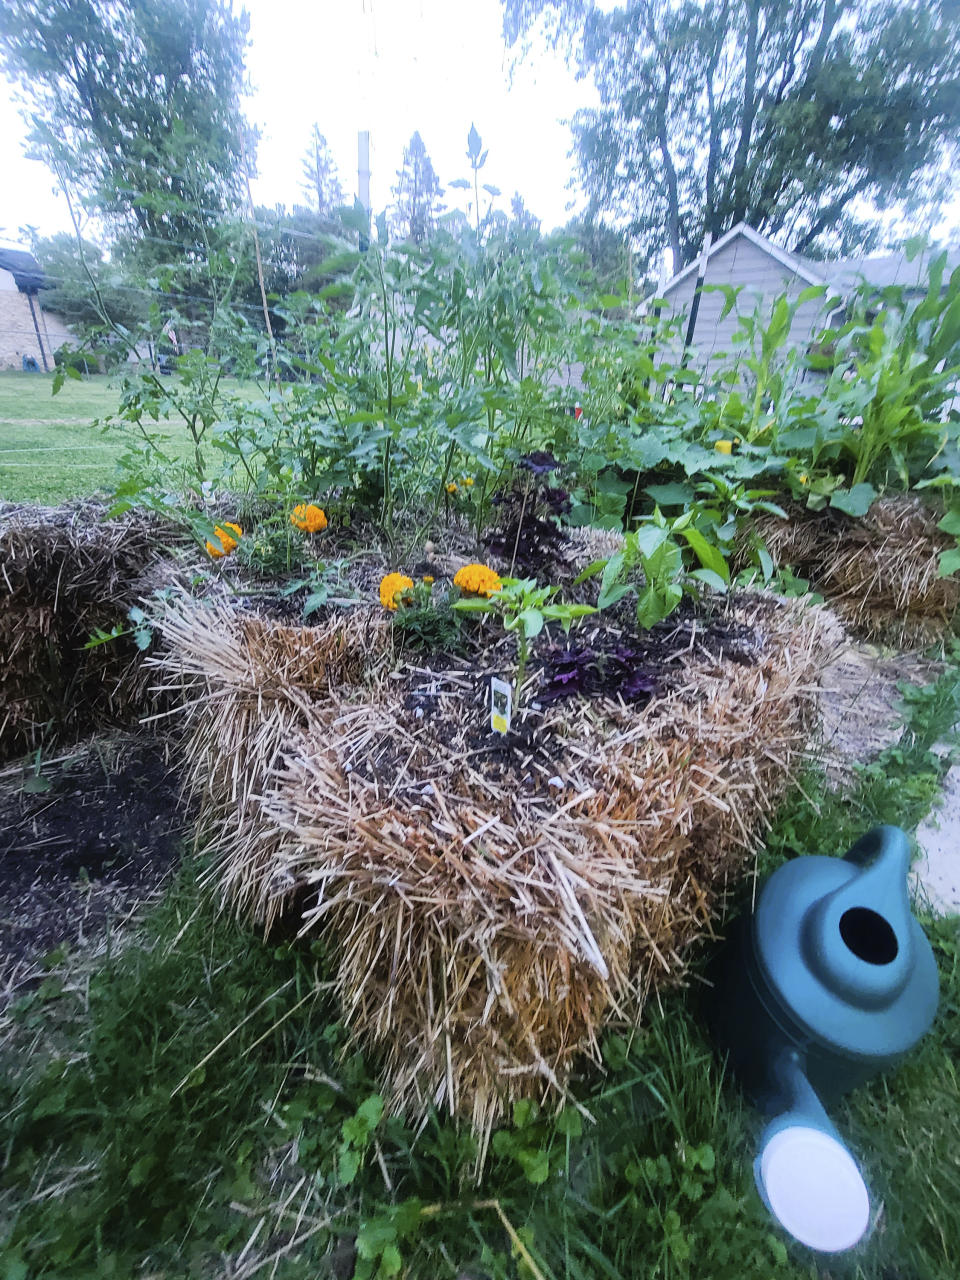 This July 2023 image provided by Adrienne Reeves shows tomatoes, marigolds and peppers growing in straw bales in a garden in Livonia, Mich. (Adrienne Reeves via AP)